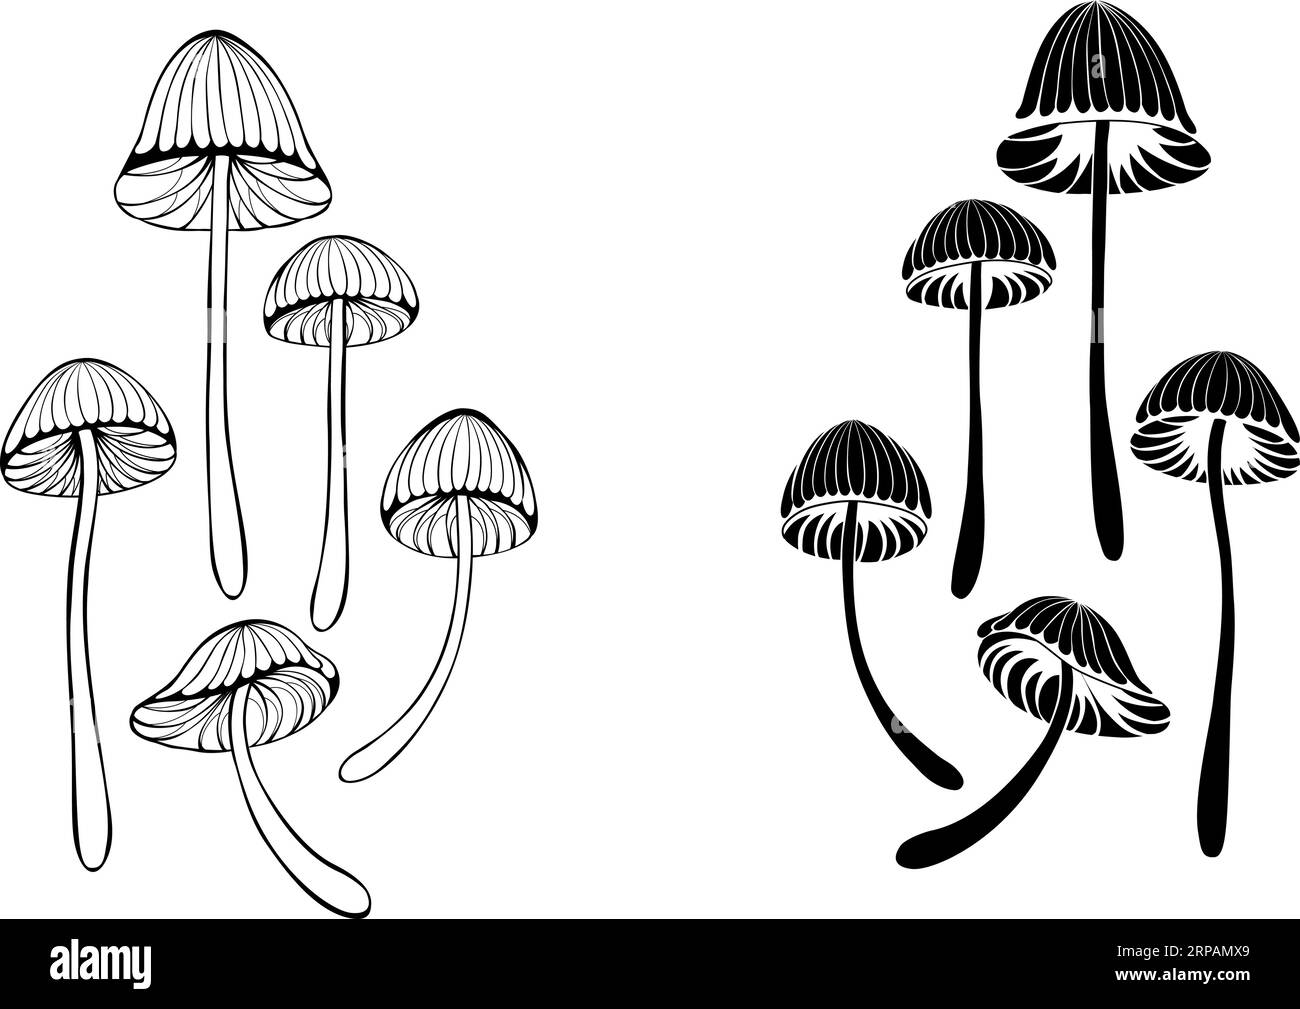 Set of silhouette and contour, artistically drawn, hallucinogenic mushrooms Psilobe cubensis on  white background. Mushrooms toadstools. Stock Vector